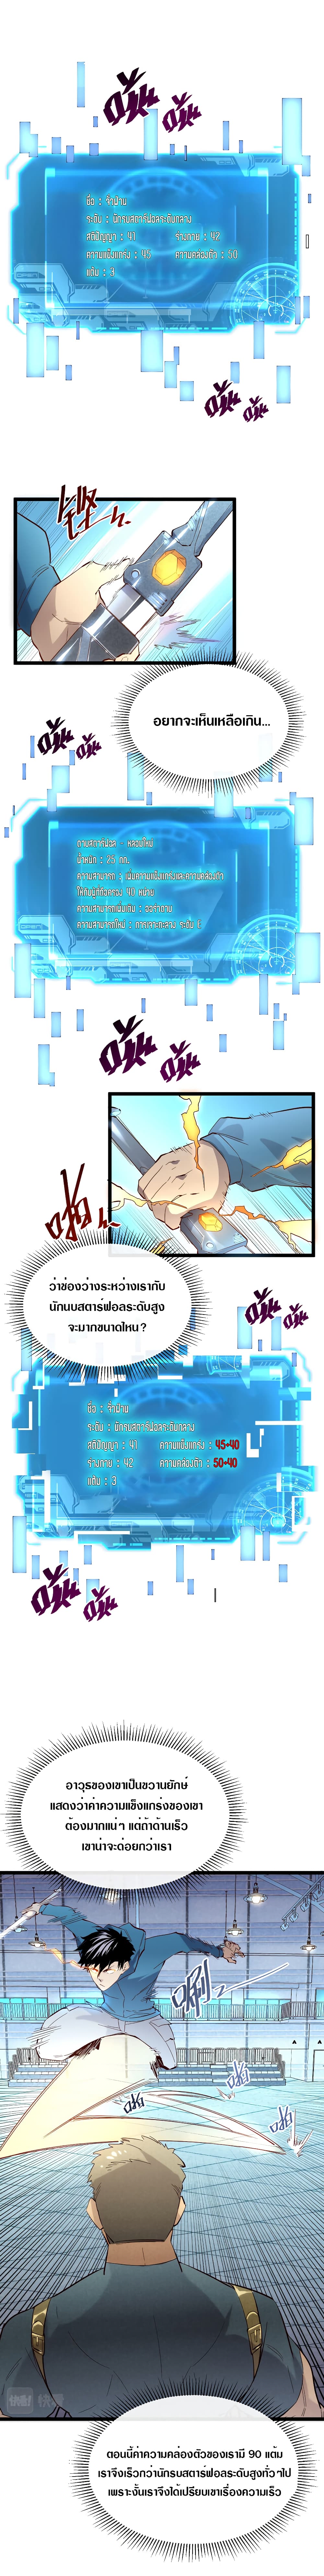 Rise From The Rubble เศษซากวันสิ้นโลก 18-18